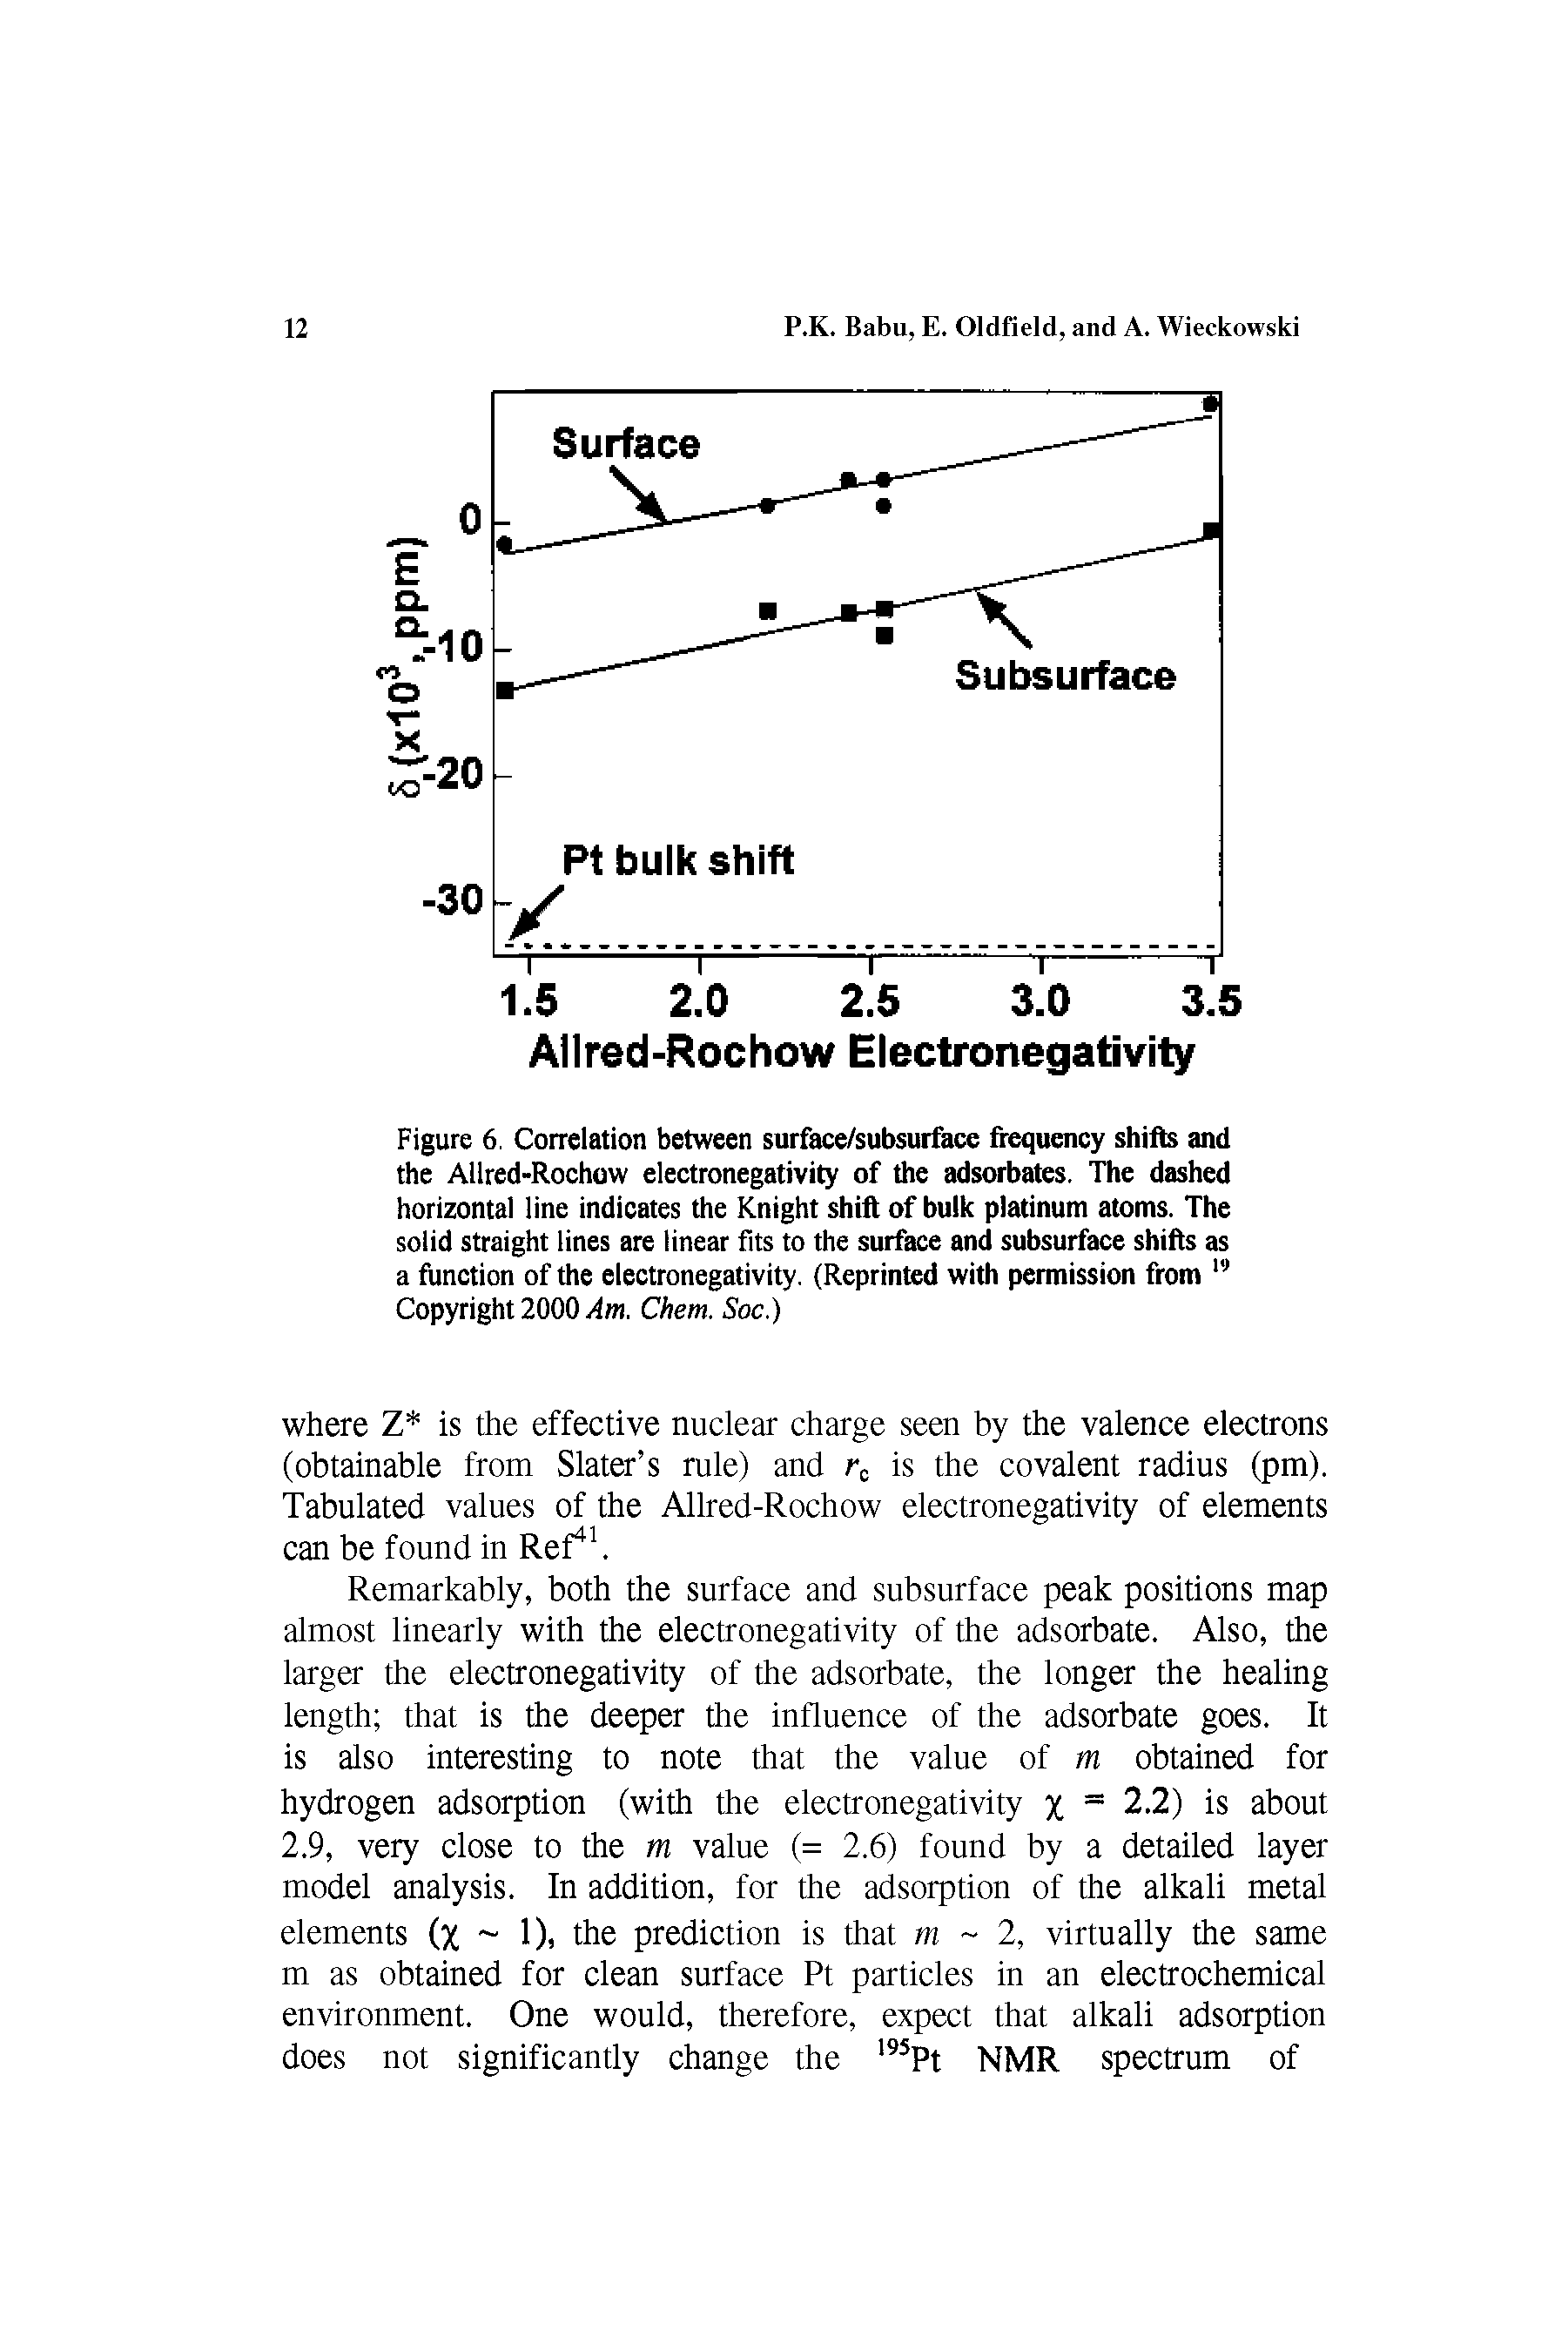 Figure 6. Correlation between surface/subsurface frequency shifts and the Allred-Rochow electronegativity of the adsorbates. The dashed horizontal line indicates the Knight shift of bulk platinum atoms. The solid straight lines are linear fits to the surface and subsurface shifts as a function of the electronegativity. (Reprinted with permission from Copyright 2000 A n. Chem. Soc.)...